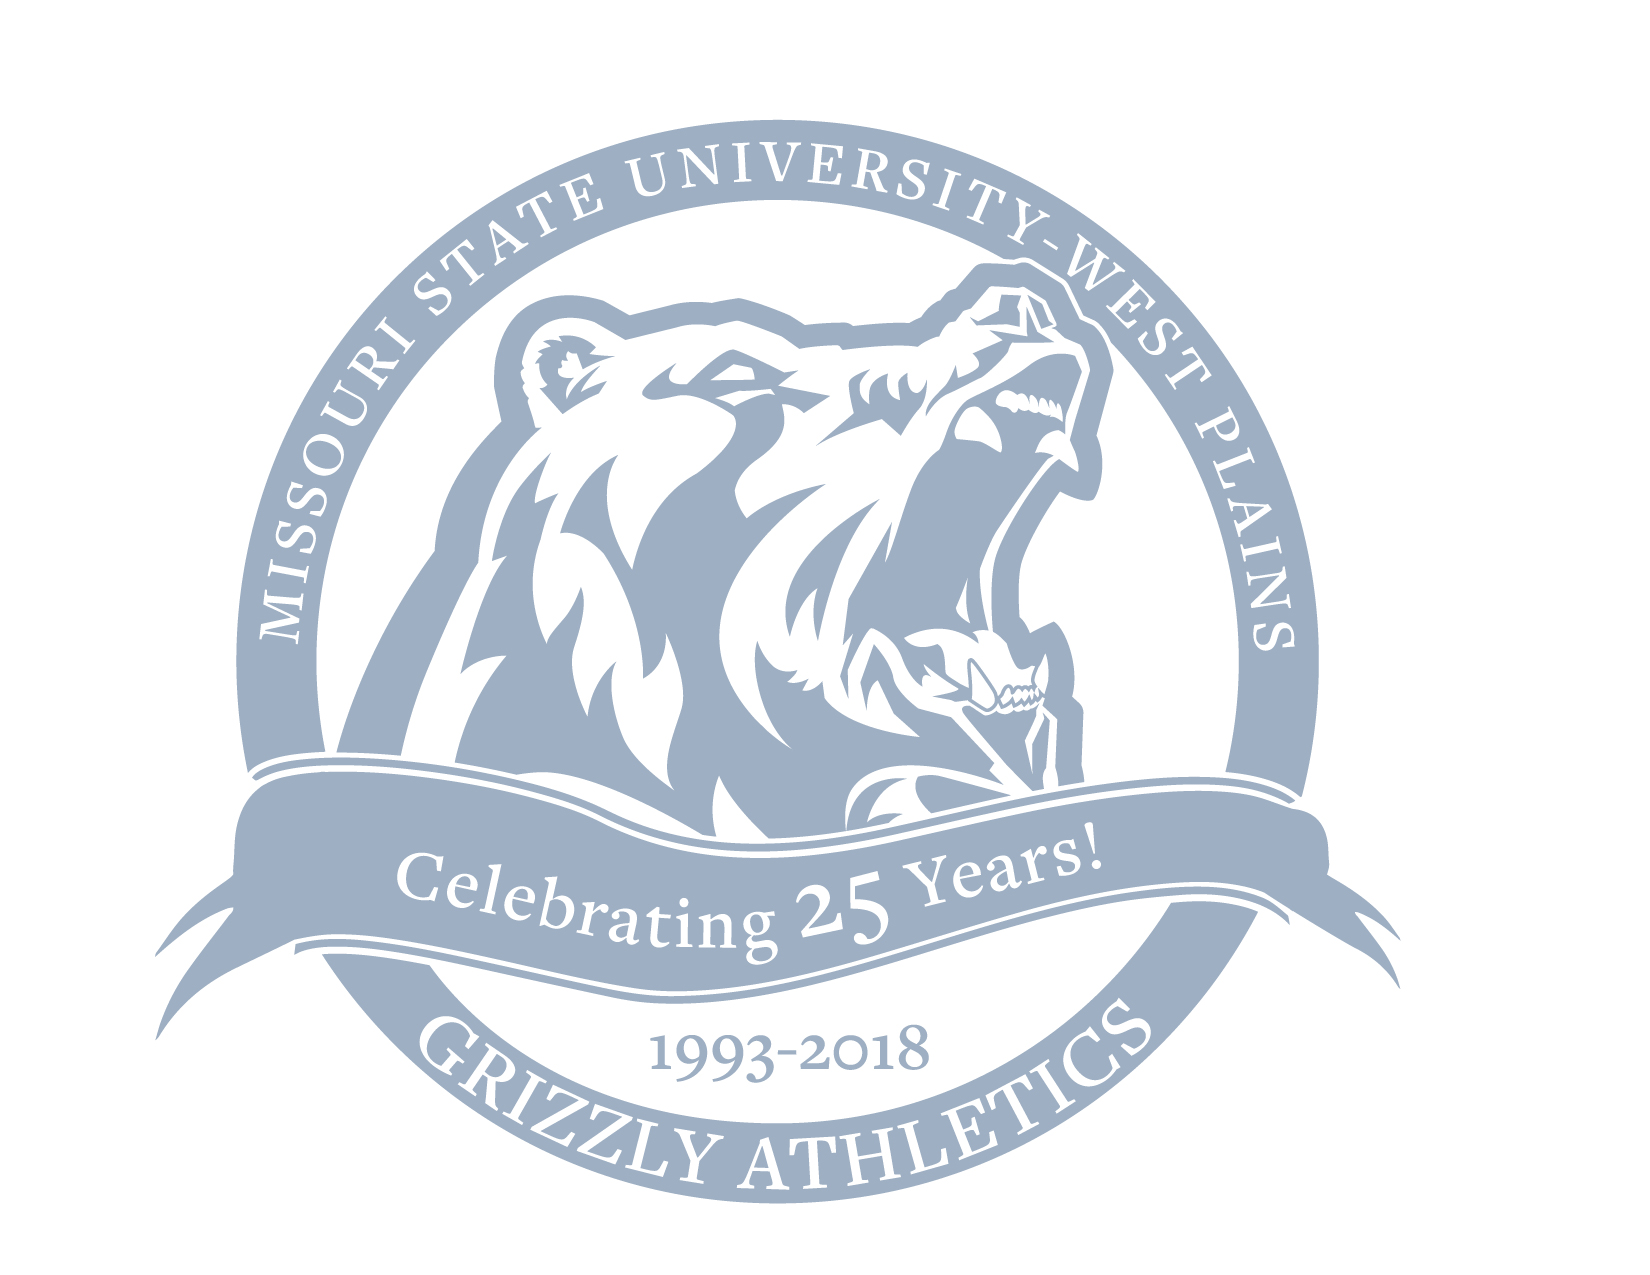 The Grizzly Athletics 25th Anniversary logo